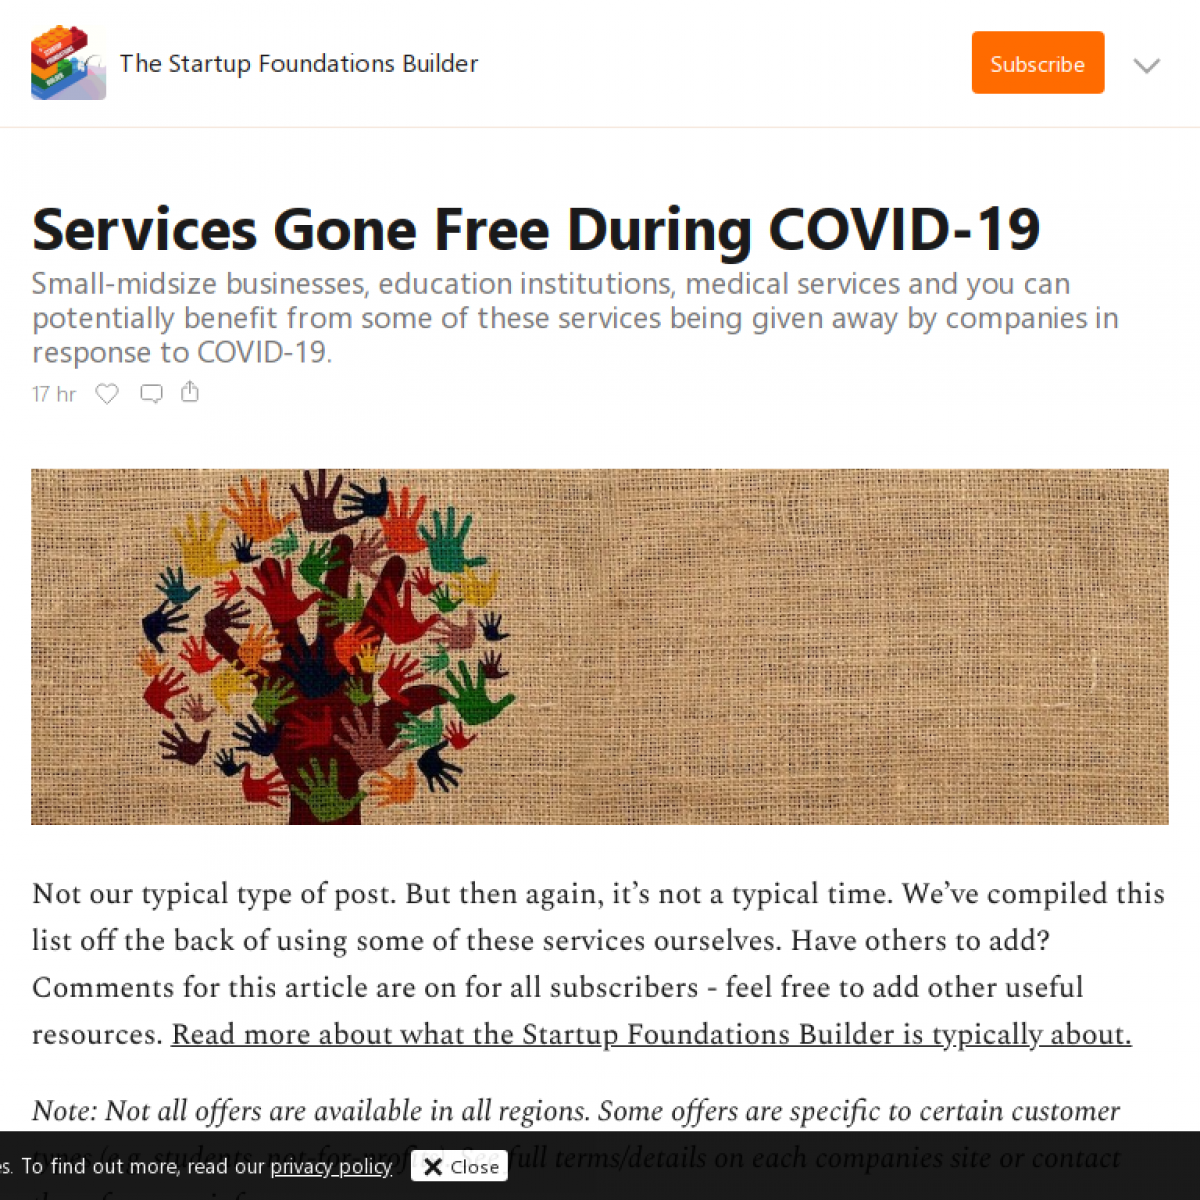 services-gone-free-during-covid-19